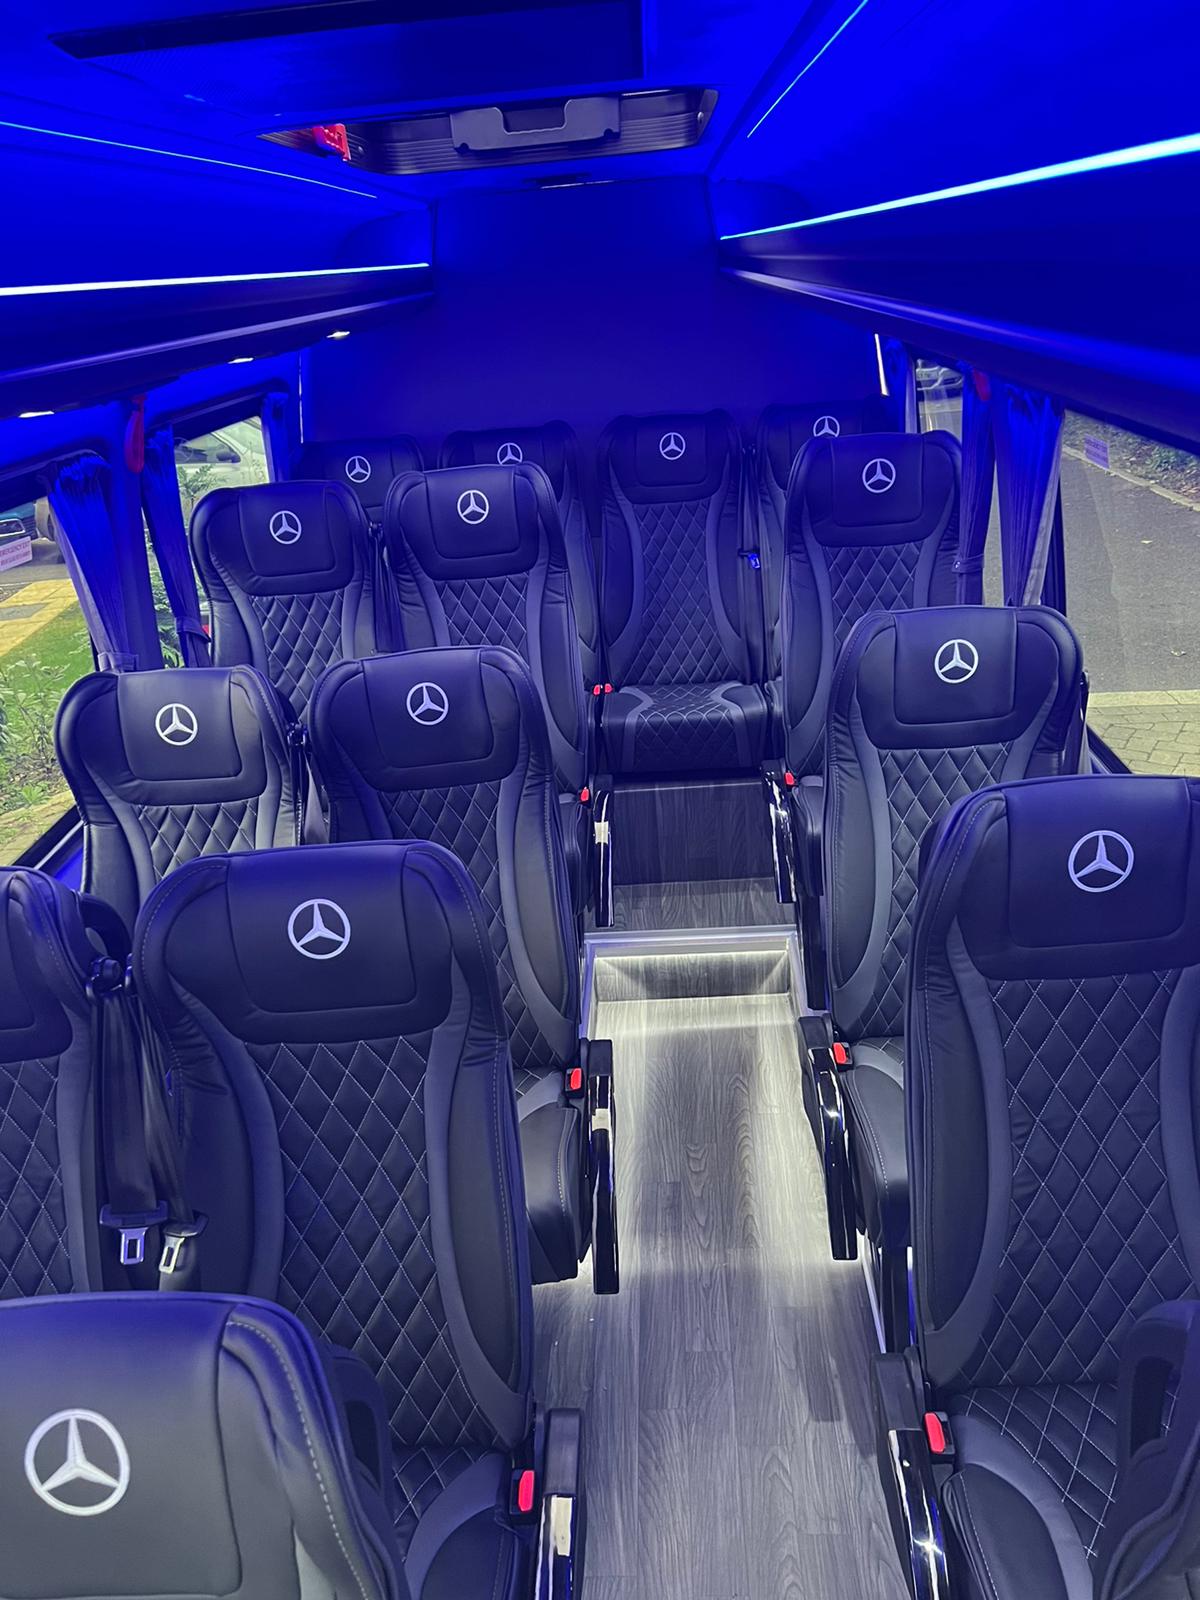 The Complete Guide to Hiring a 16 Seater Minibus for Group Events in the UK